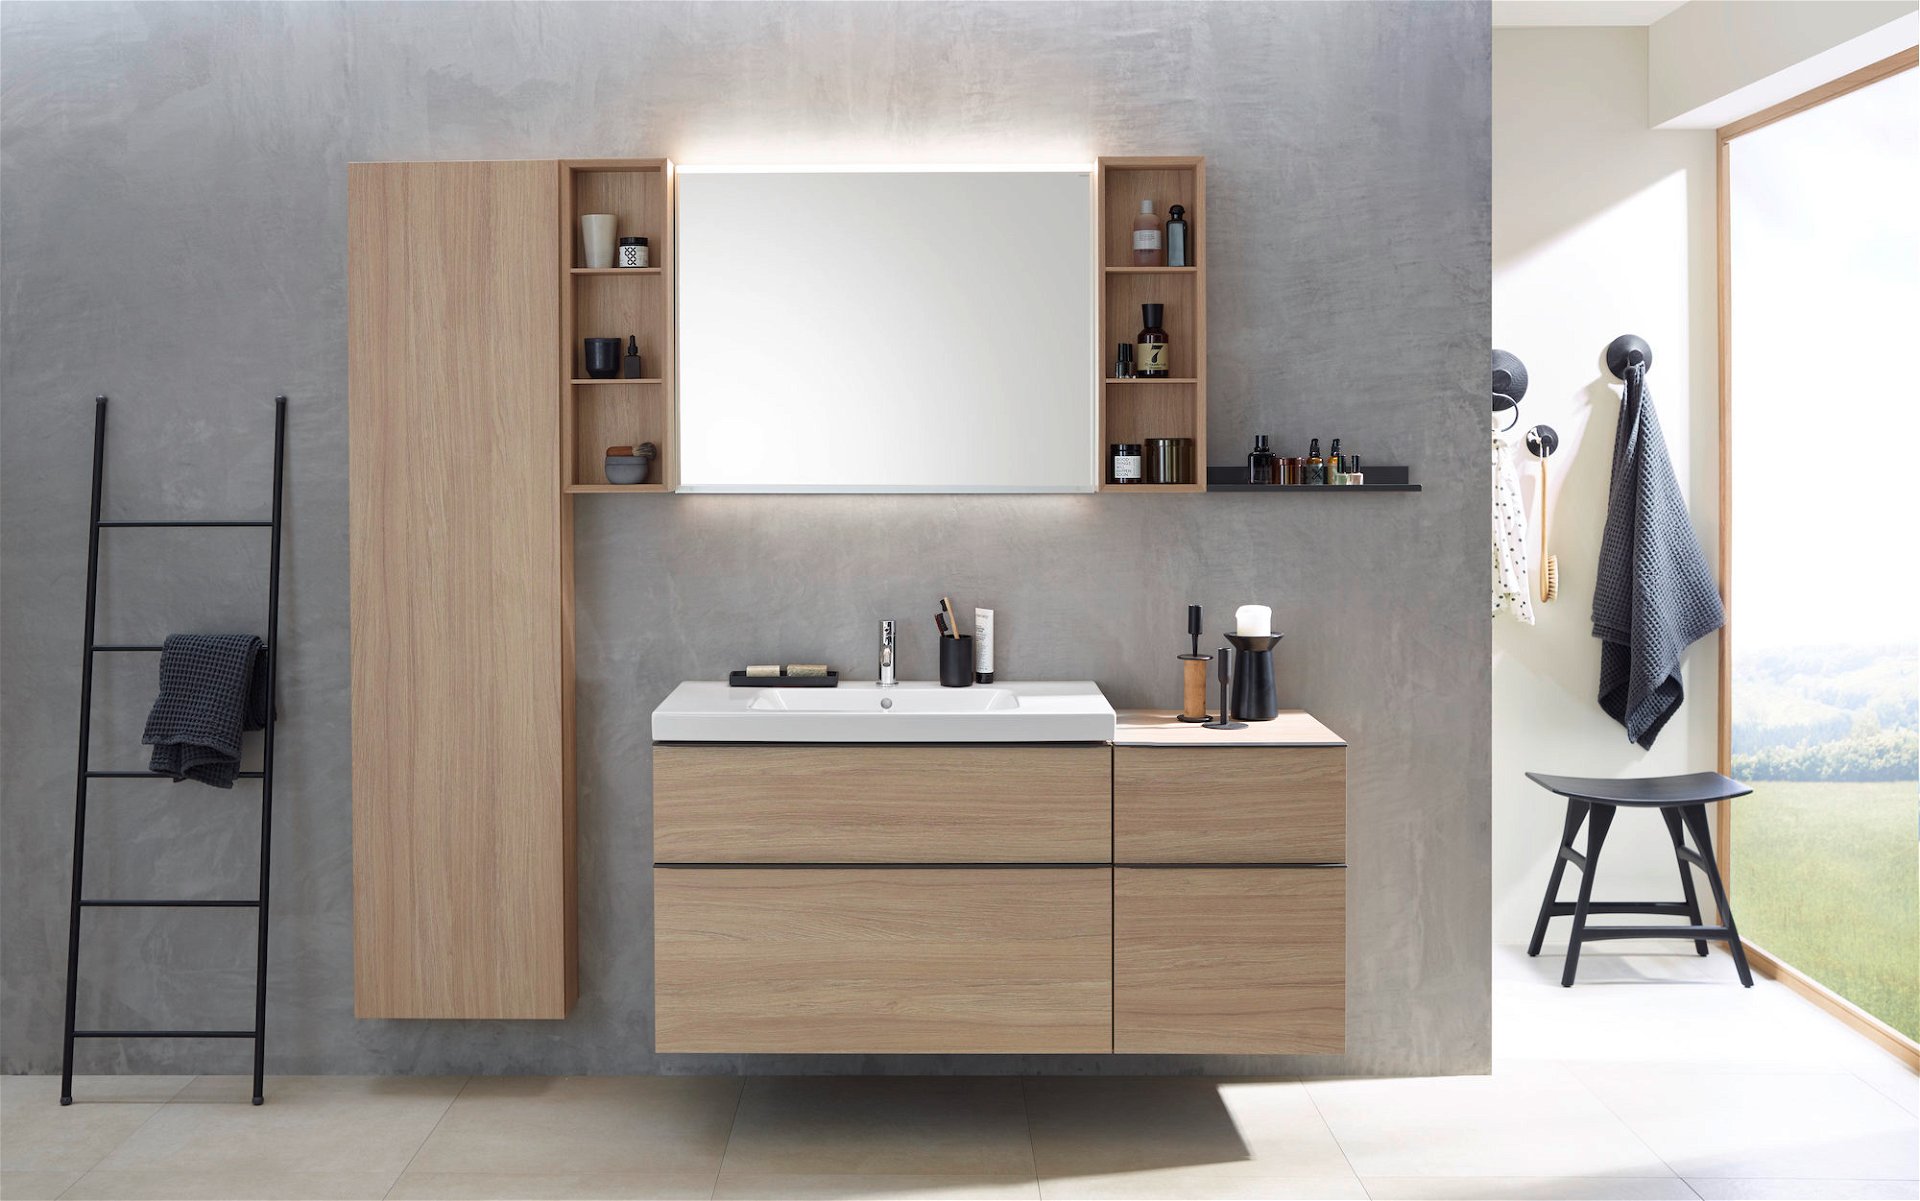 High-Quality Furniture in Wood Look from Geberit for A Homely Bathroom Design